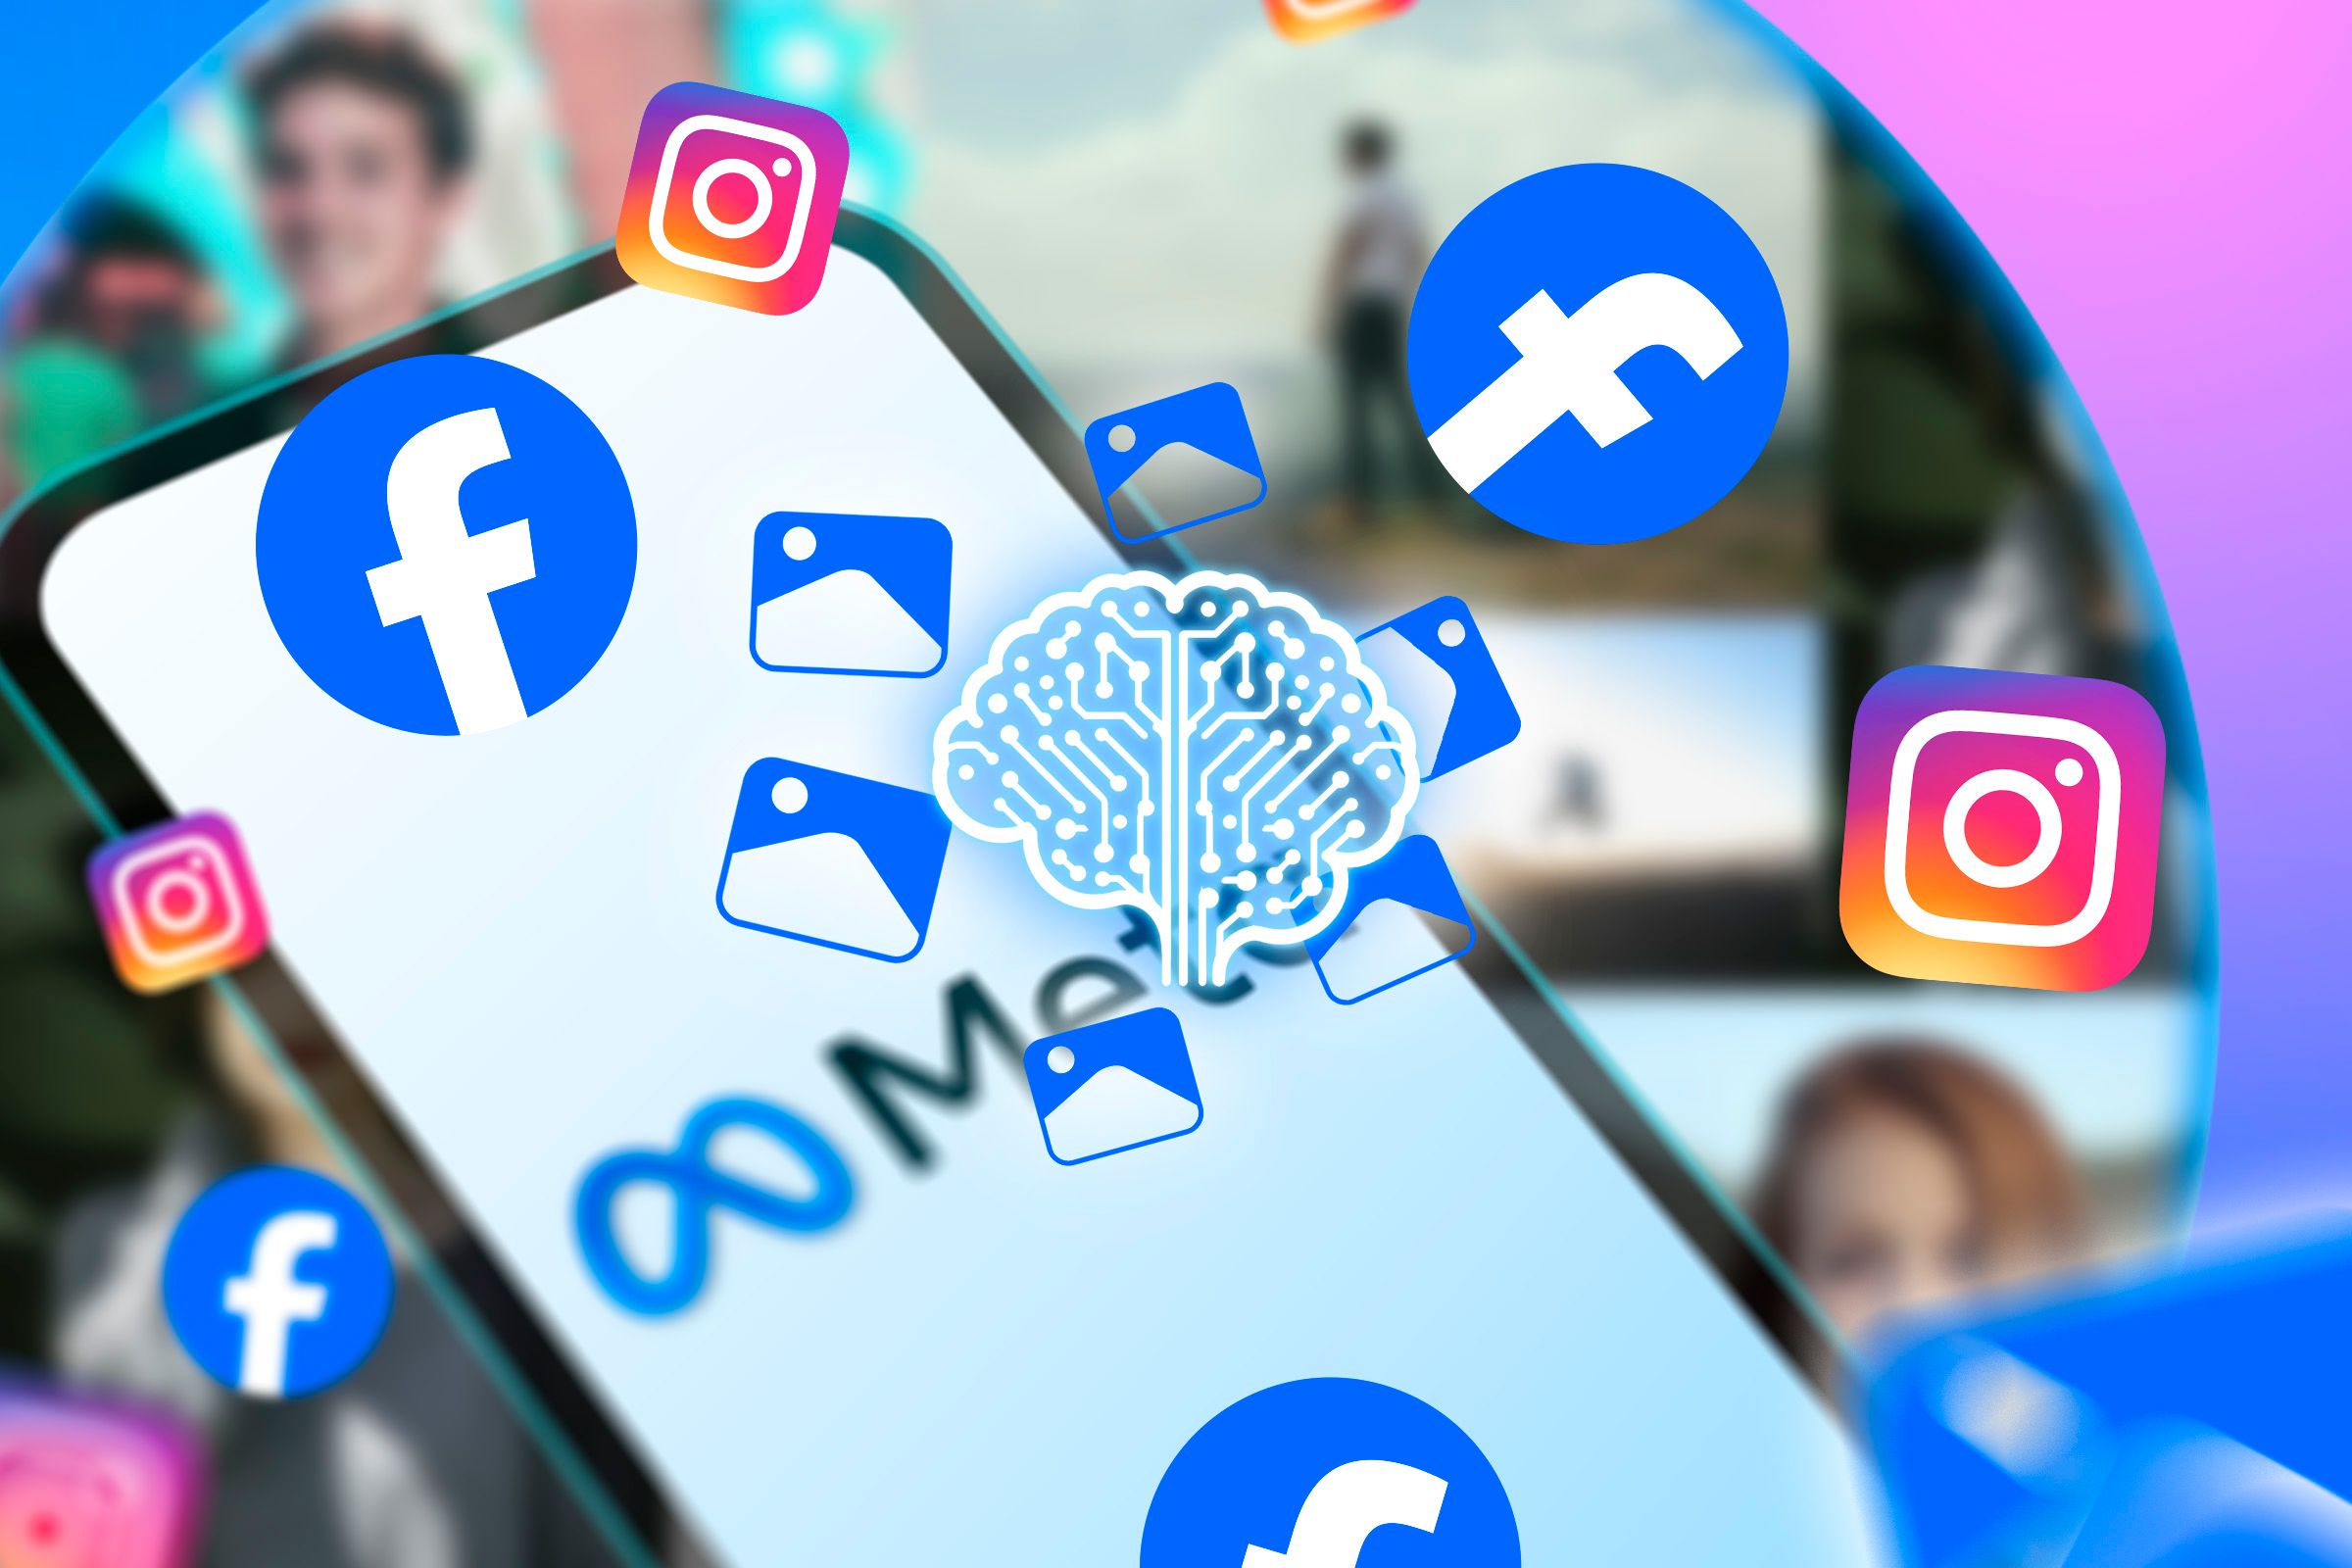 An illustration of an AI brain with several image icons around it and the Facebook and Instagram logos and a phone with the Meta logo in the background.